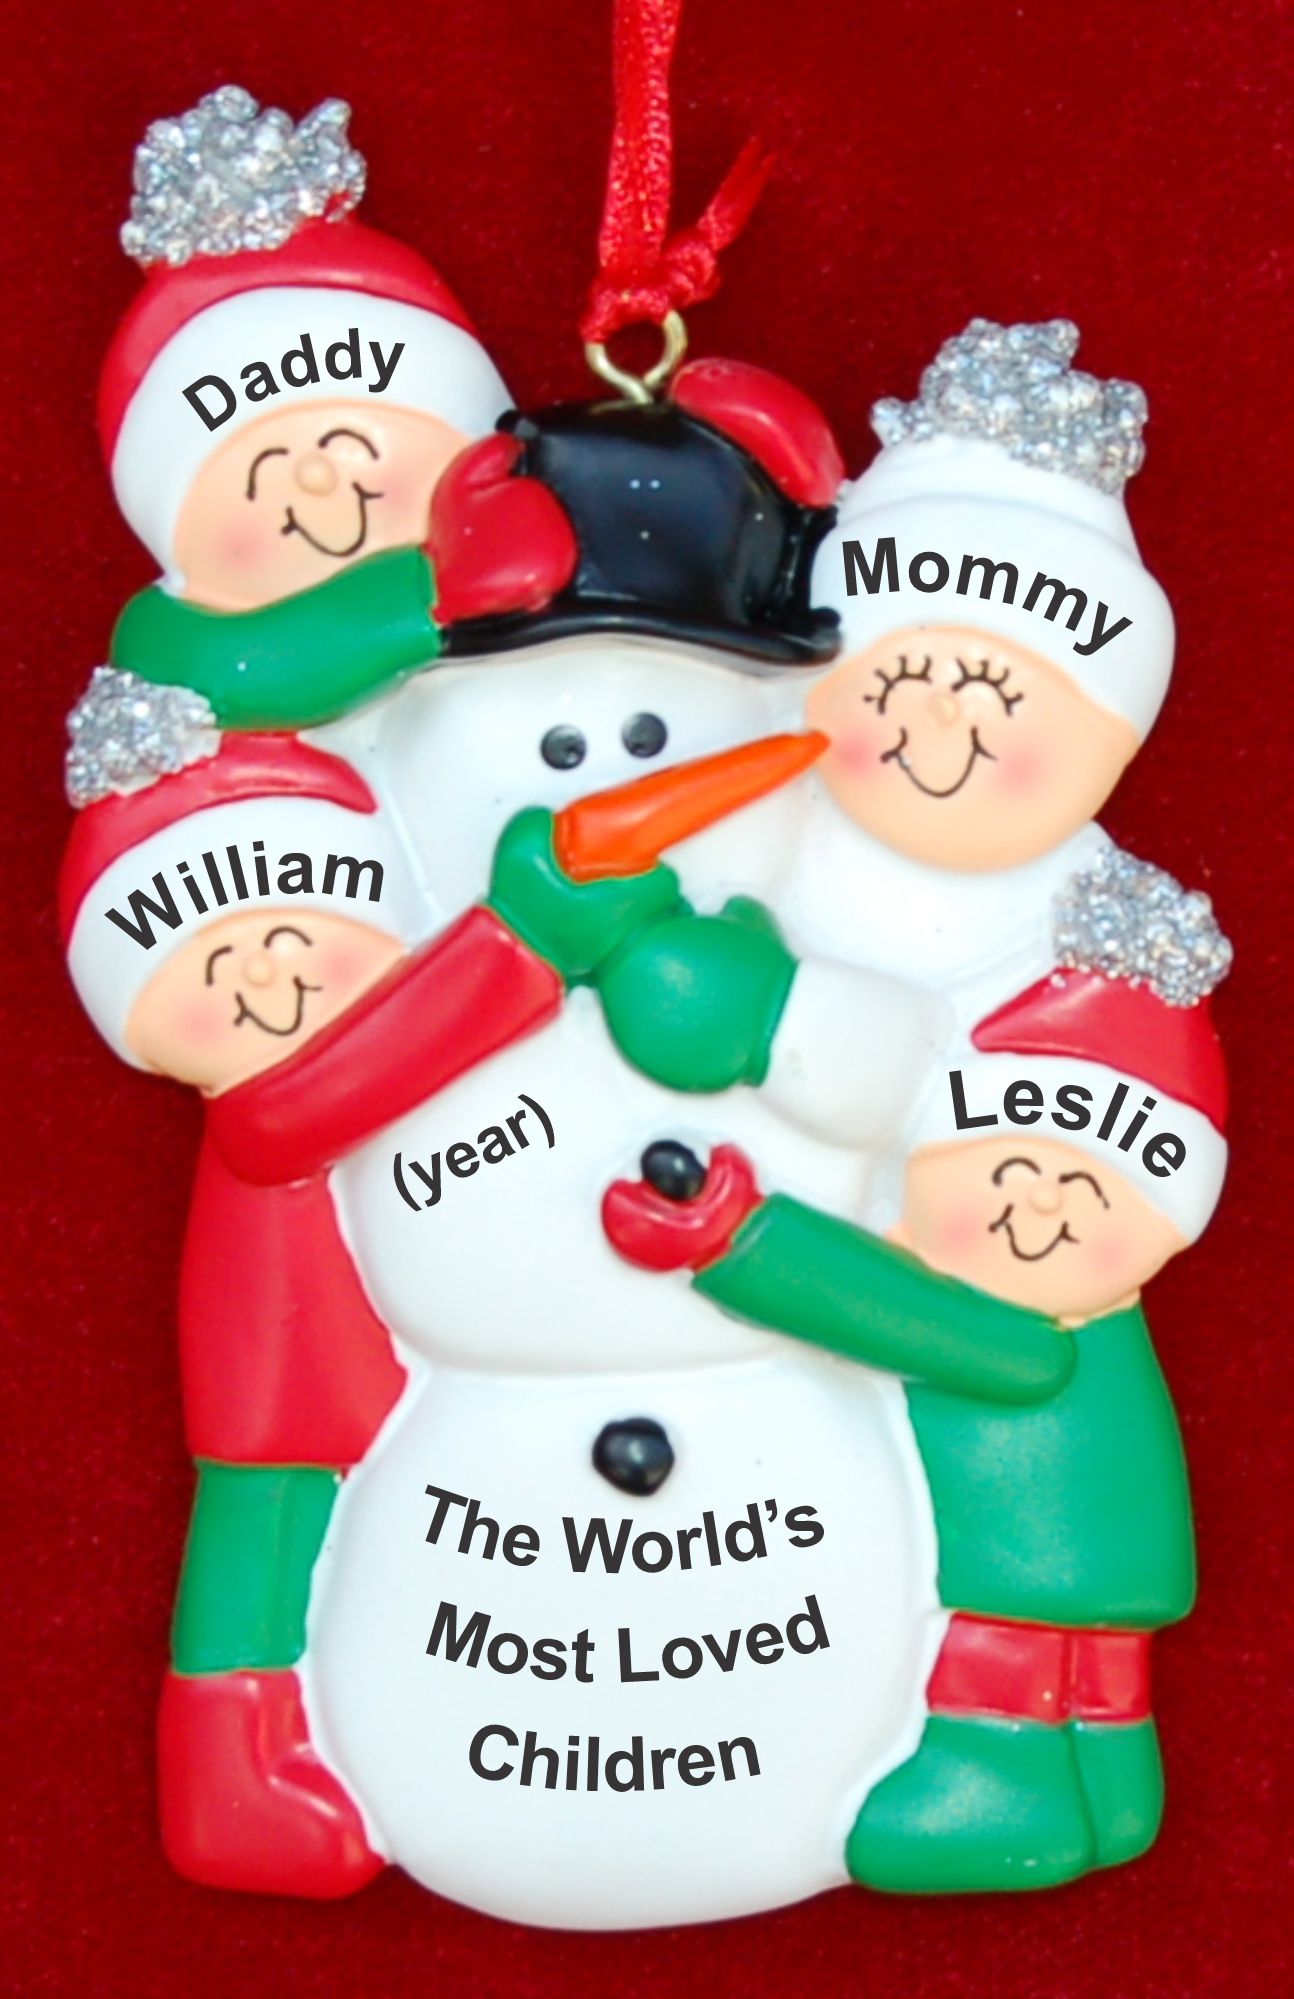 Adopted Christmas Ornament Family of 3 Adopts Second Child by Russell Rhodes